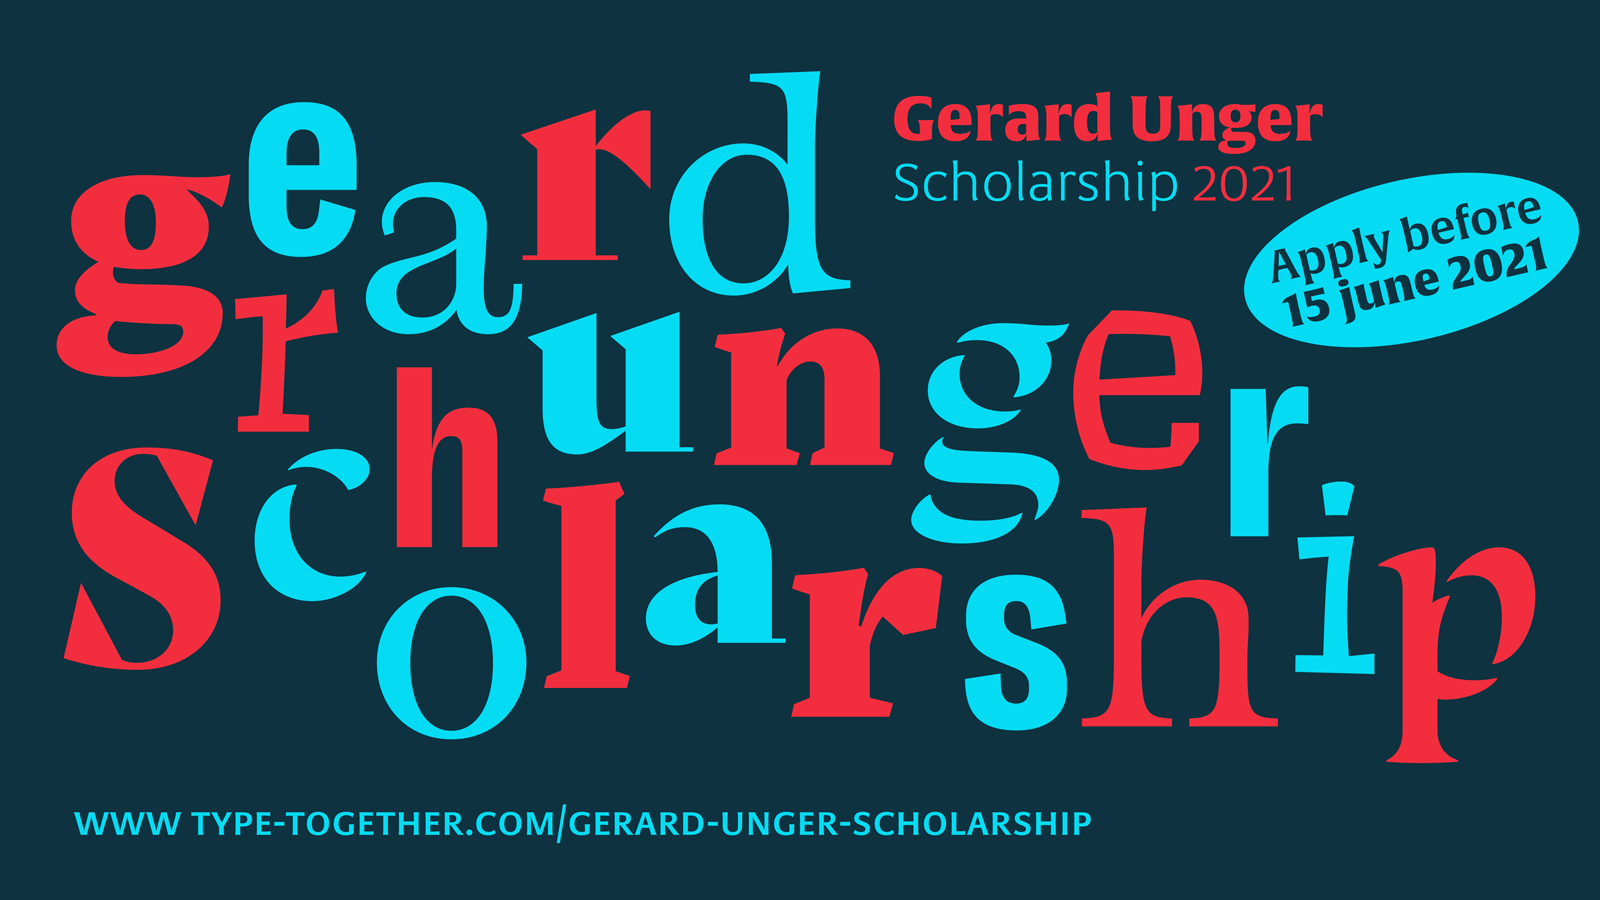 Call for Entries for the 2021 Gerard Unger Scholarship. Application deadline is June 15, 2021.